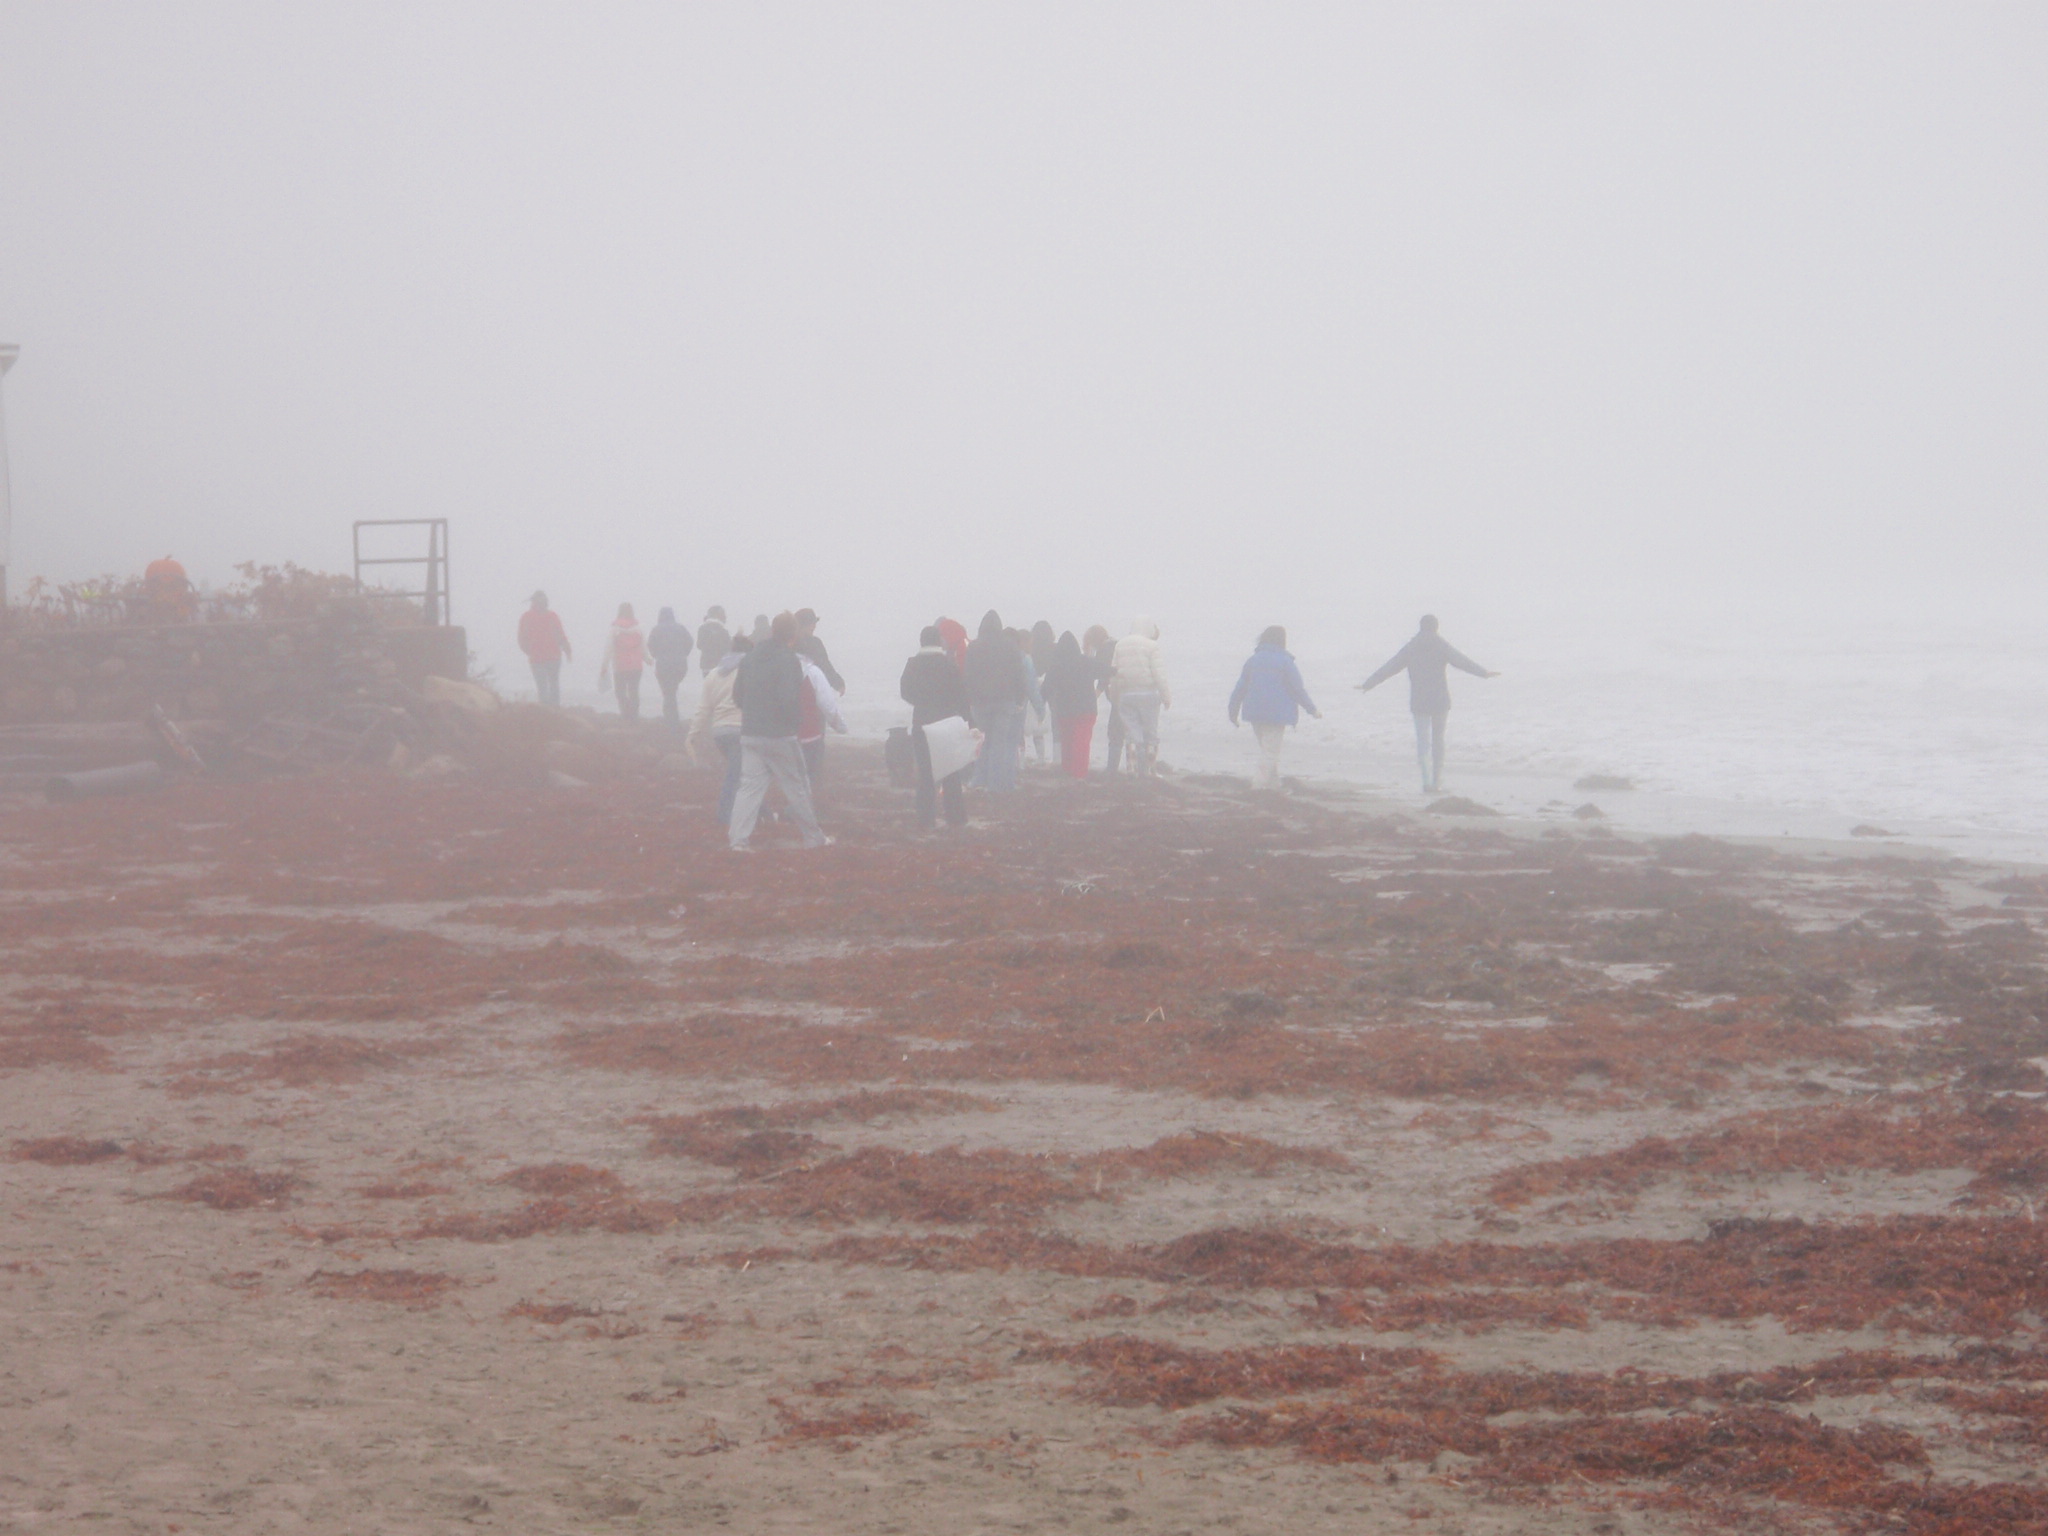 group of volunteers cleaning up the beach in the fog